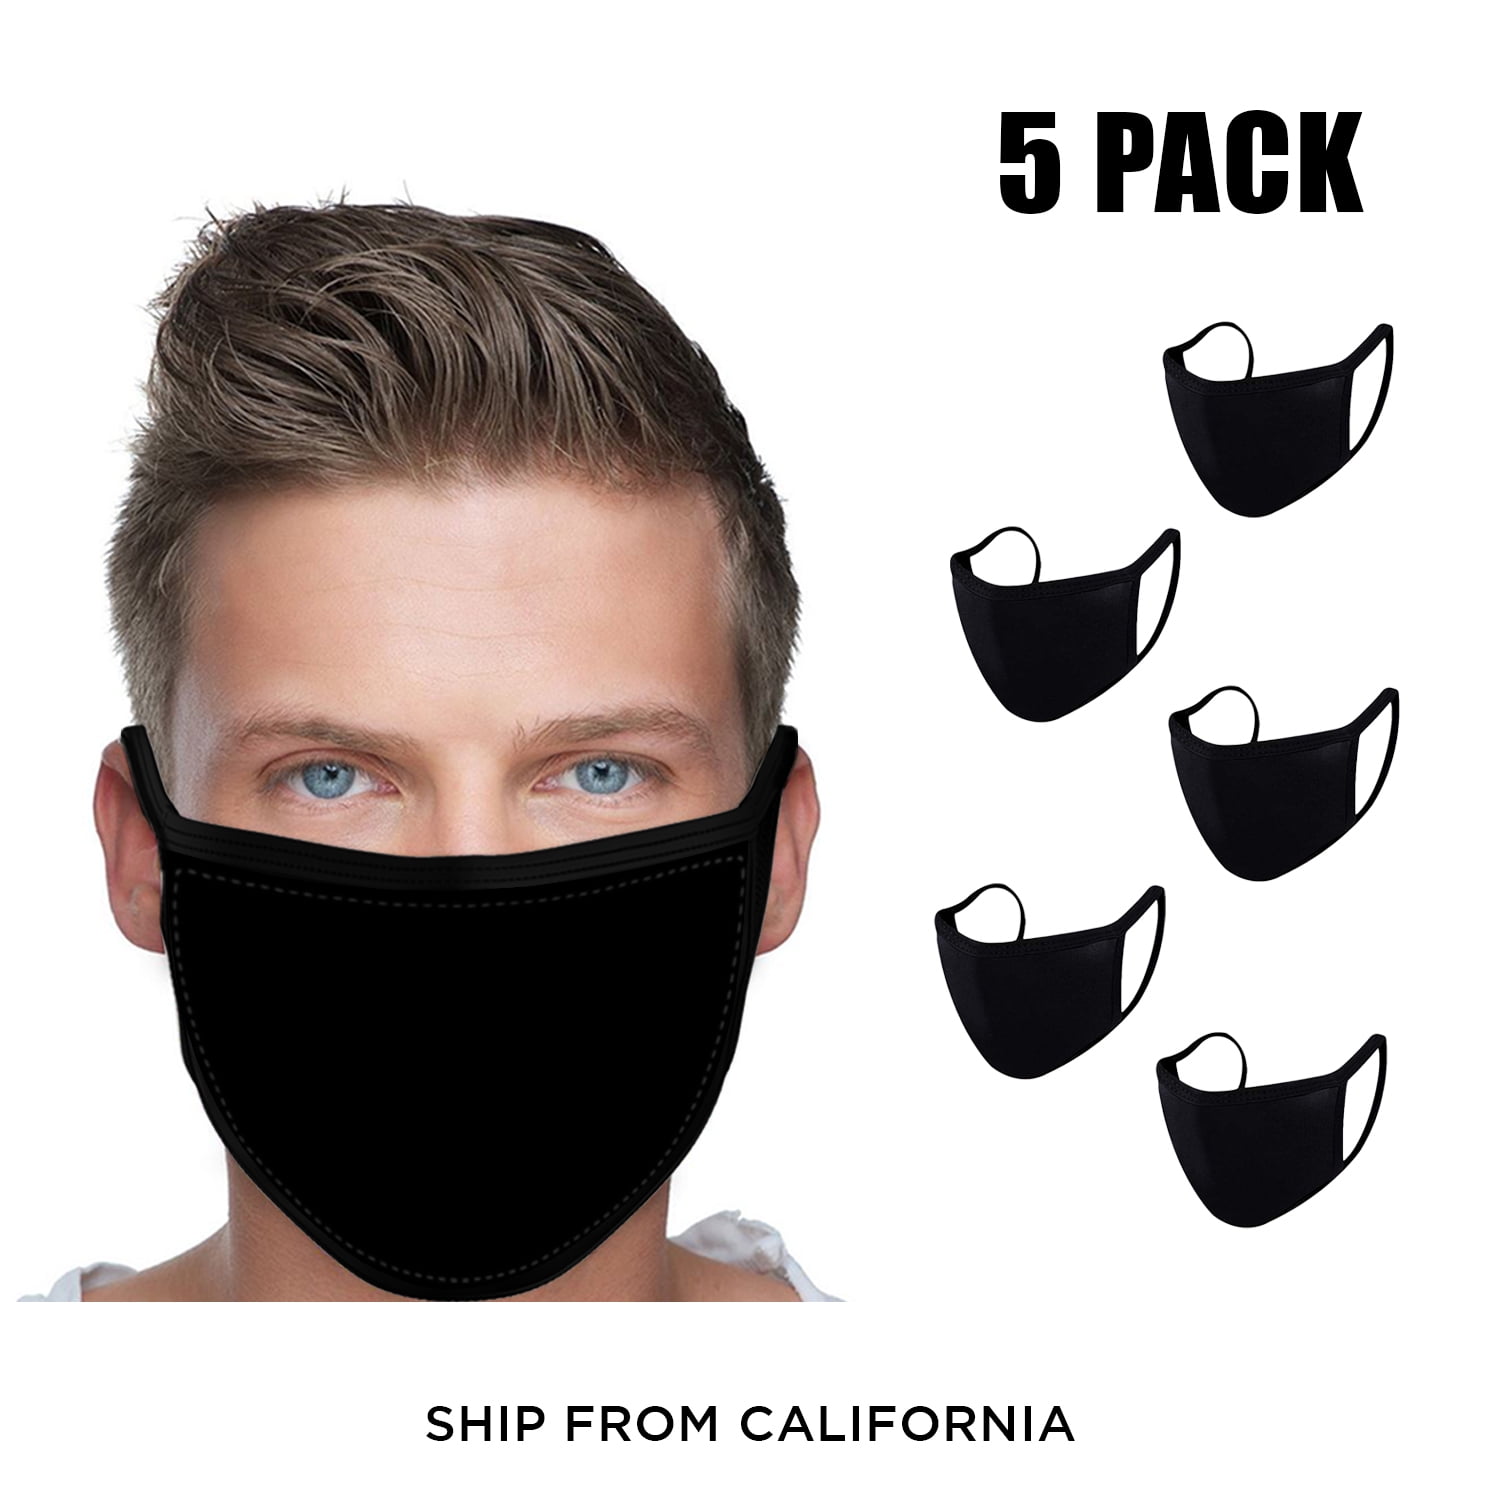 Details about   New Unisex 3D Printed Fashion Cloth Mouth Face Mask Cover Washable Reusable Mask 